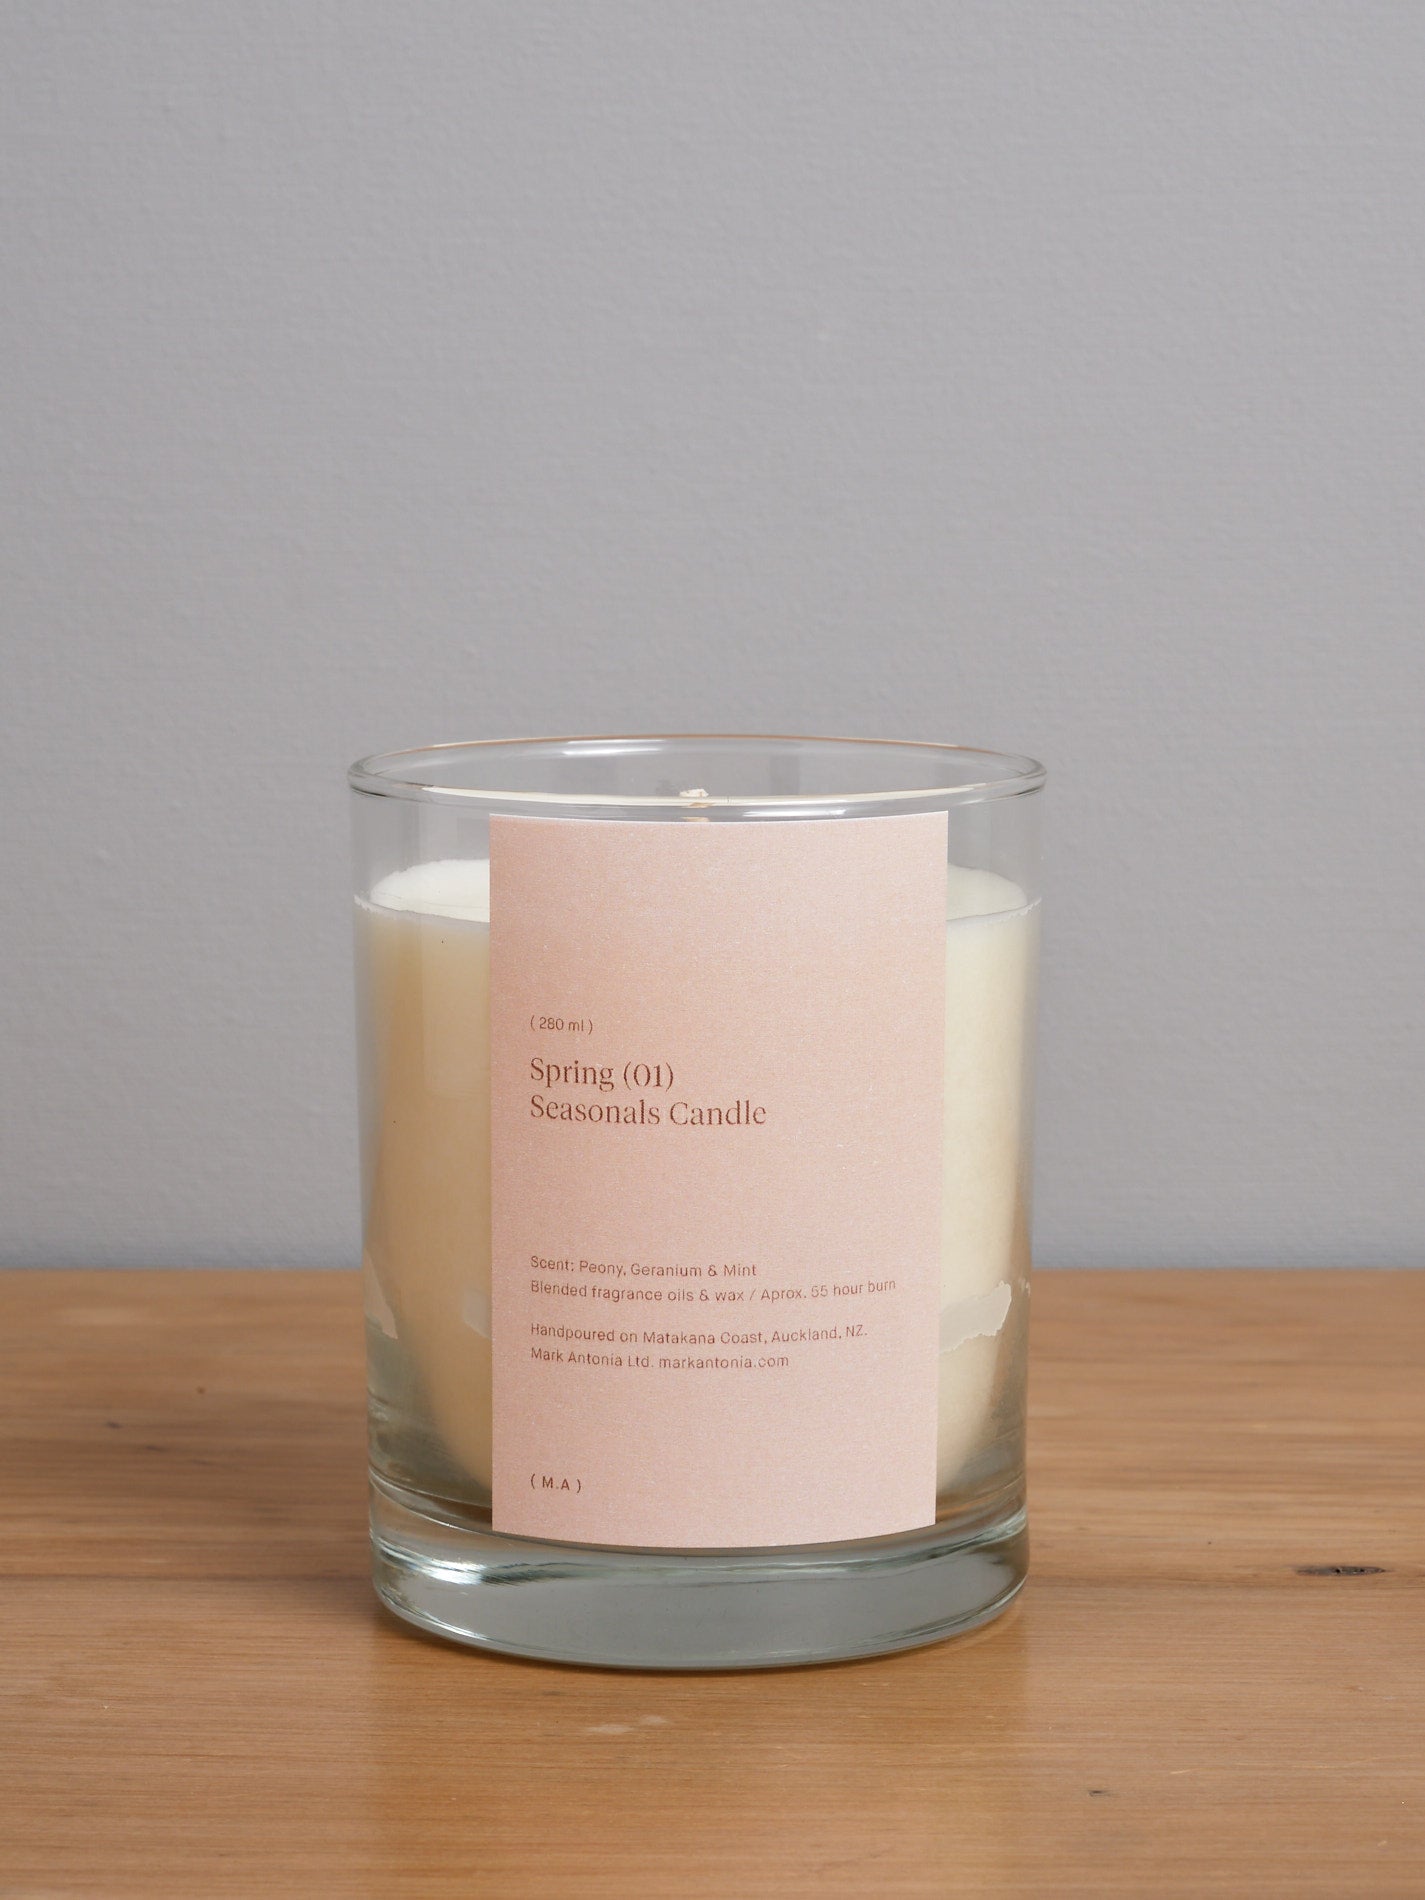 A Mark Antonia Seasonal Candle – Peony, Mint & Geranium with a label on it sitting on a wooden table.